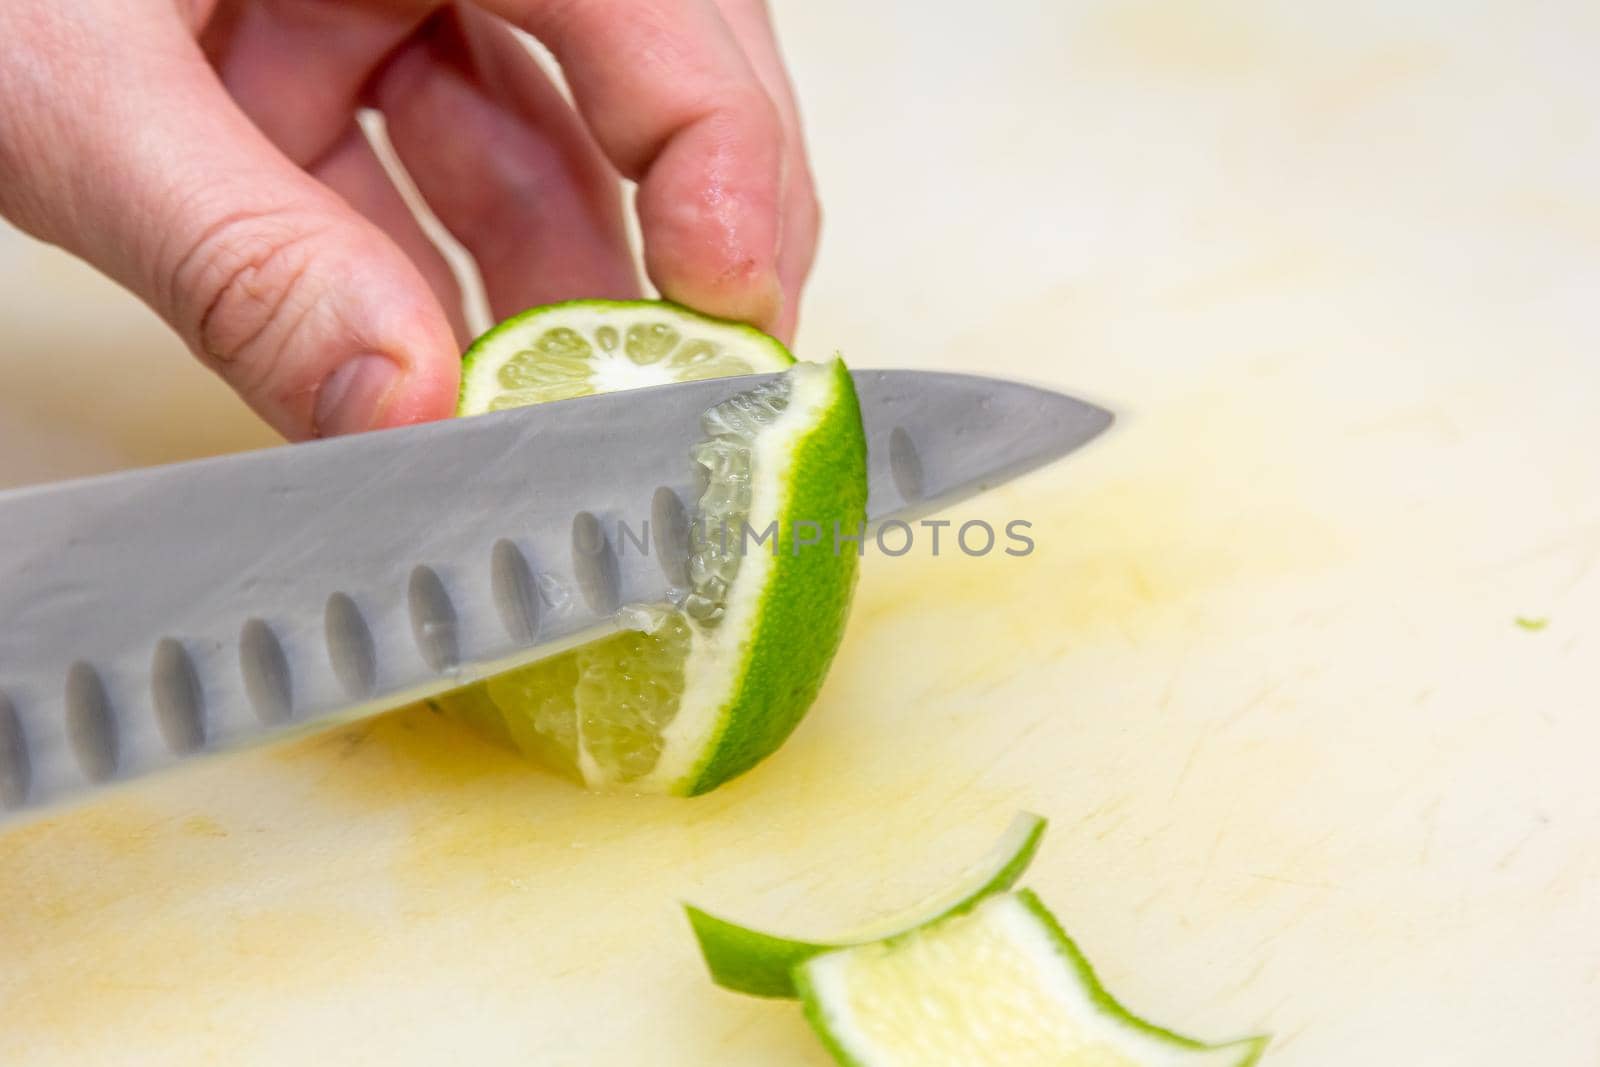 The chef cuts the skin from the lime with a knife on a white board in the restaurant